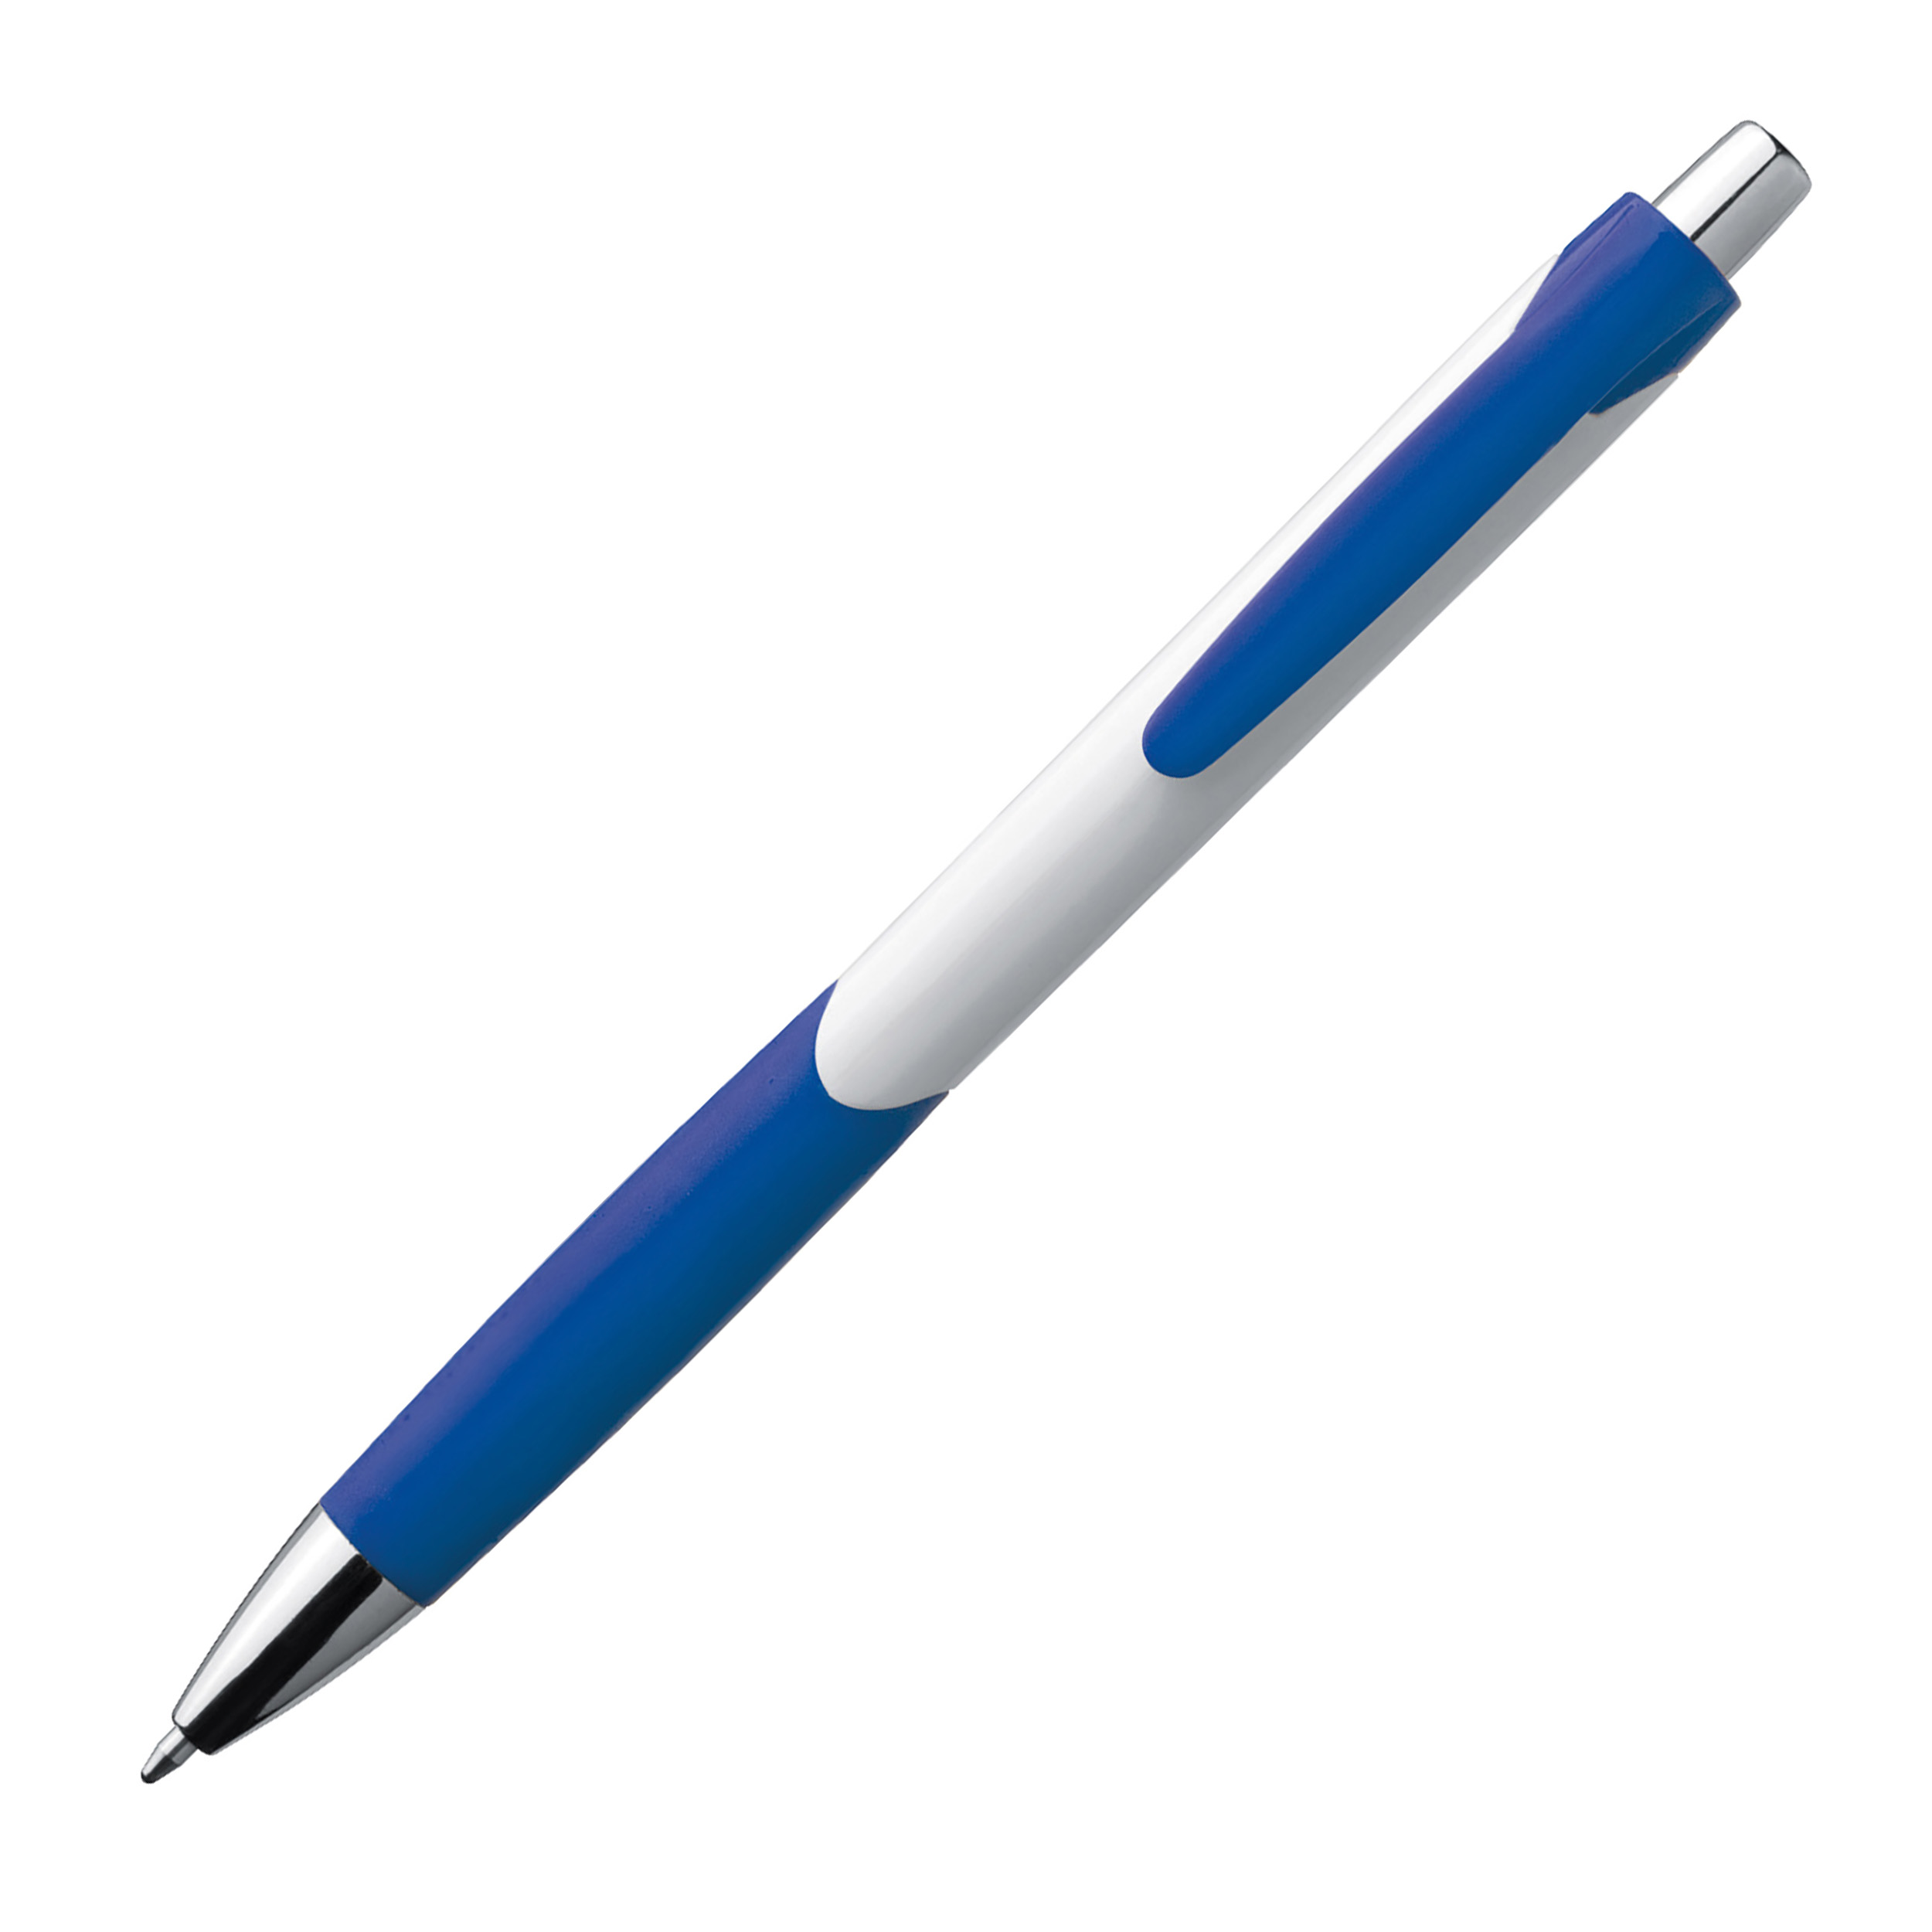 Plastic ball pen with white shaft and rubber grip zone